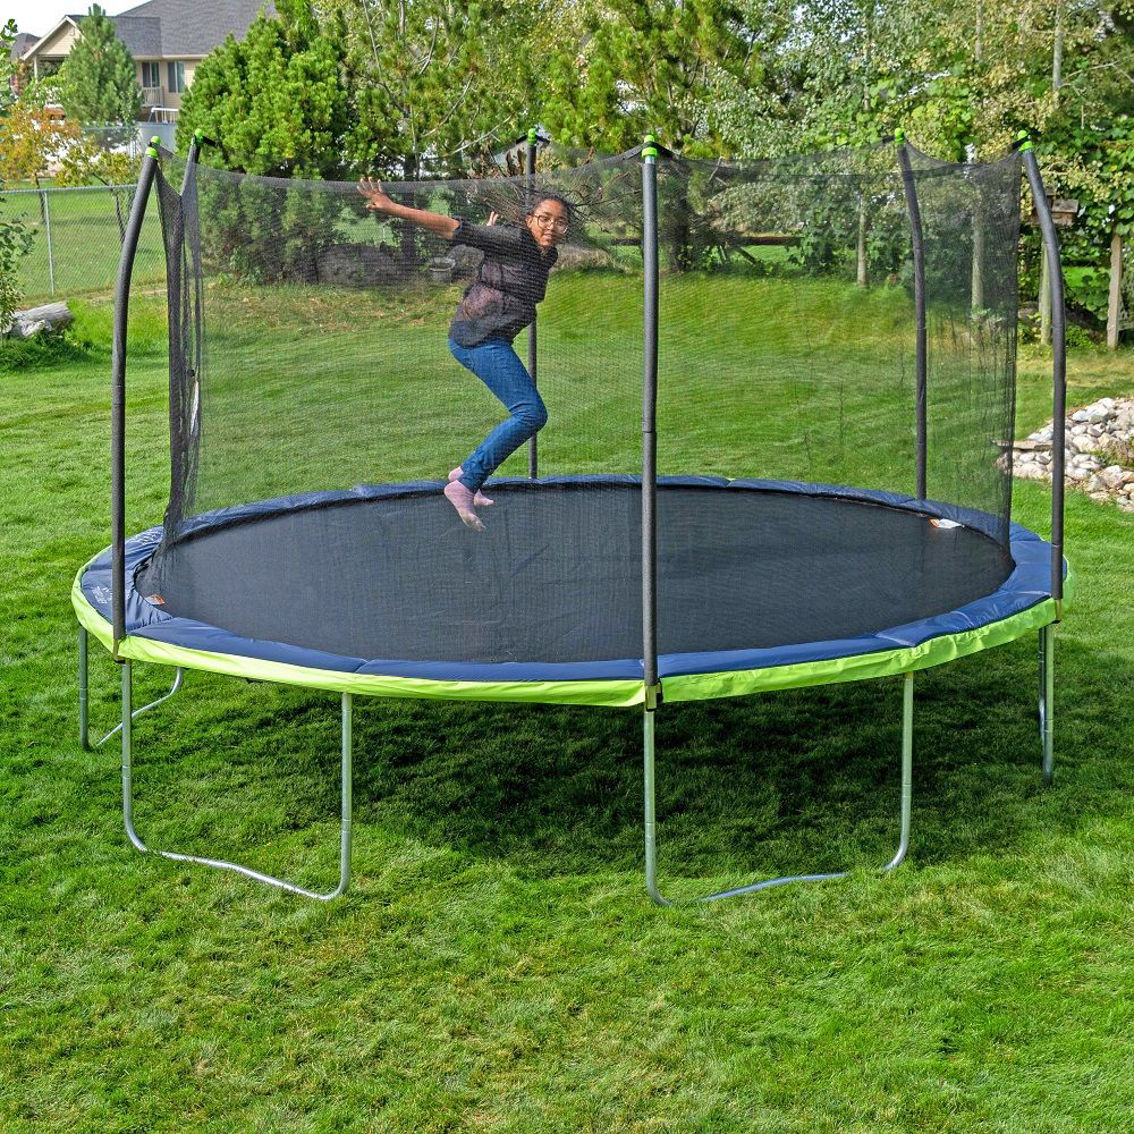 Skywalker Trampolines 15x13 Oval Trampoline Combo with Dual Color Spring Pad - Image 5 of 5